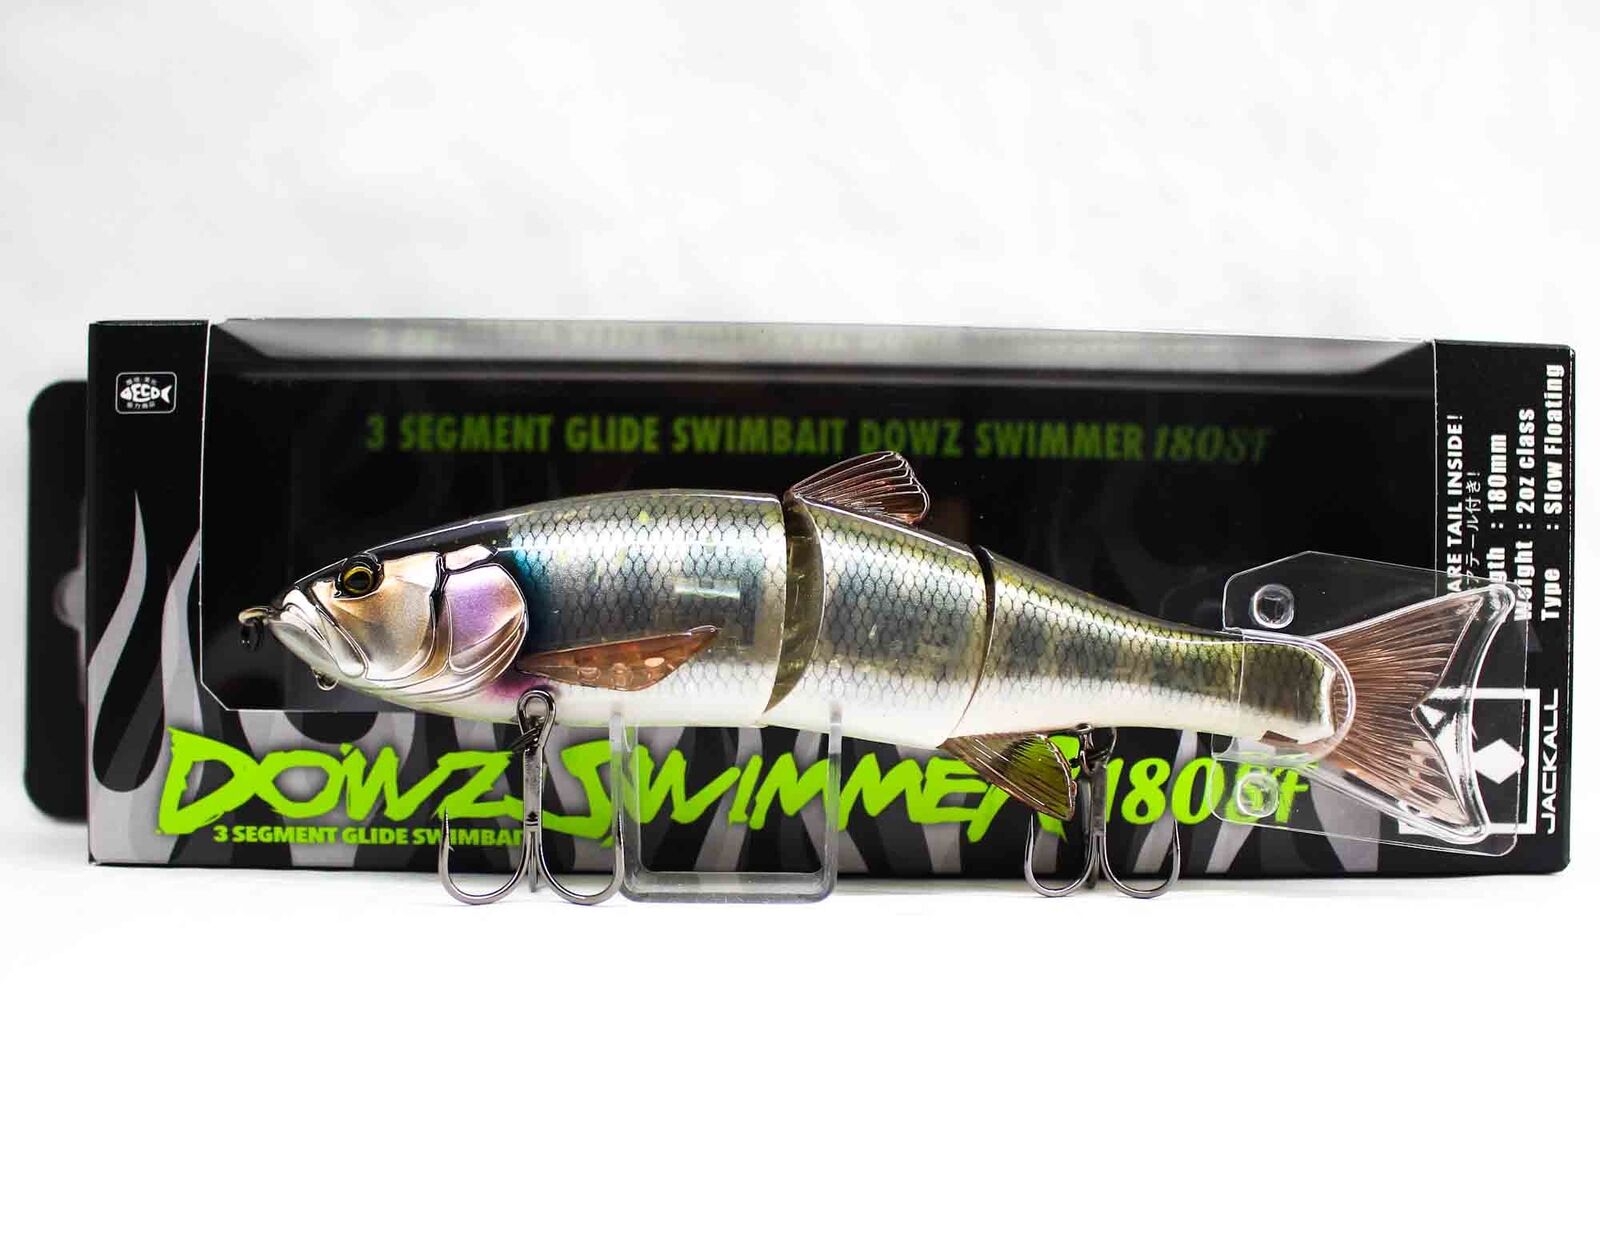 Jackall Dowzswimmer 180 SF Floating Lure Maruhata Delicious Swimmer (9891)